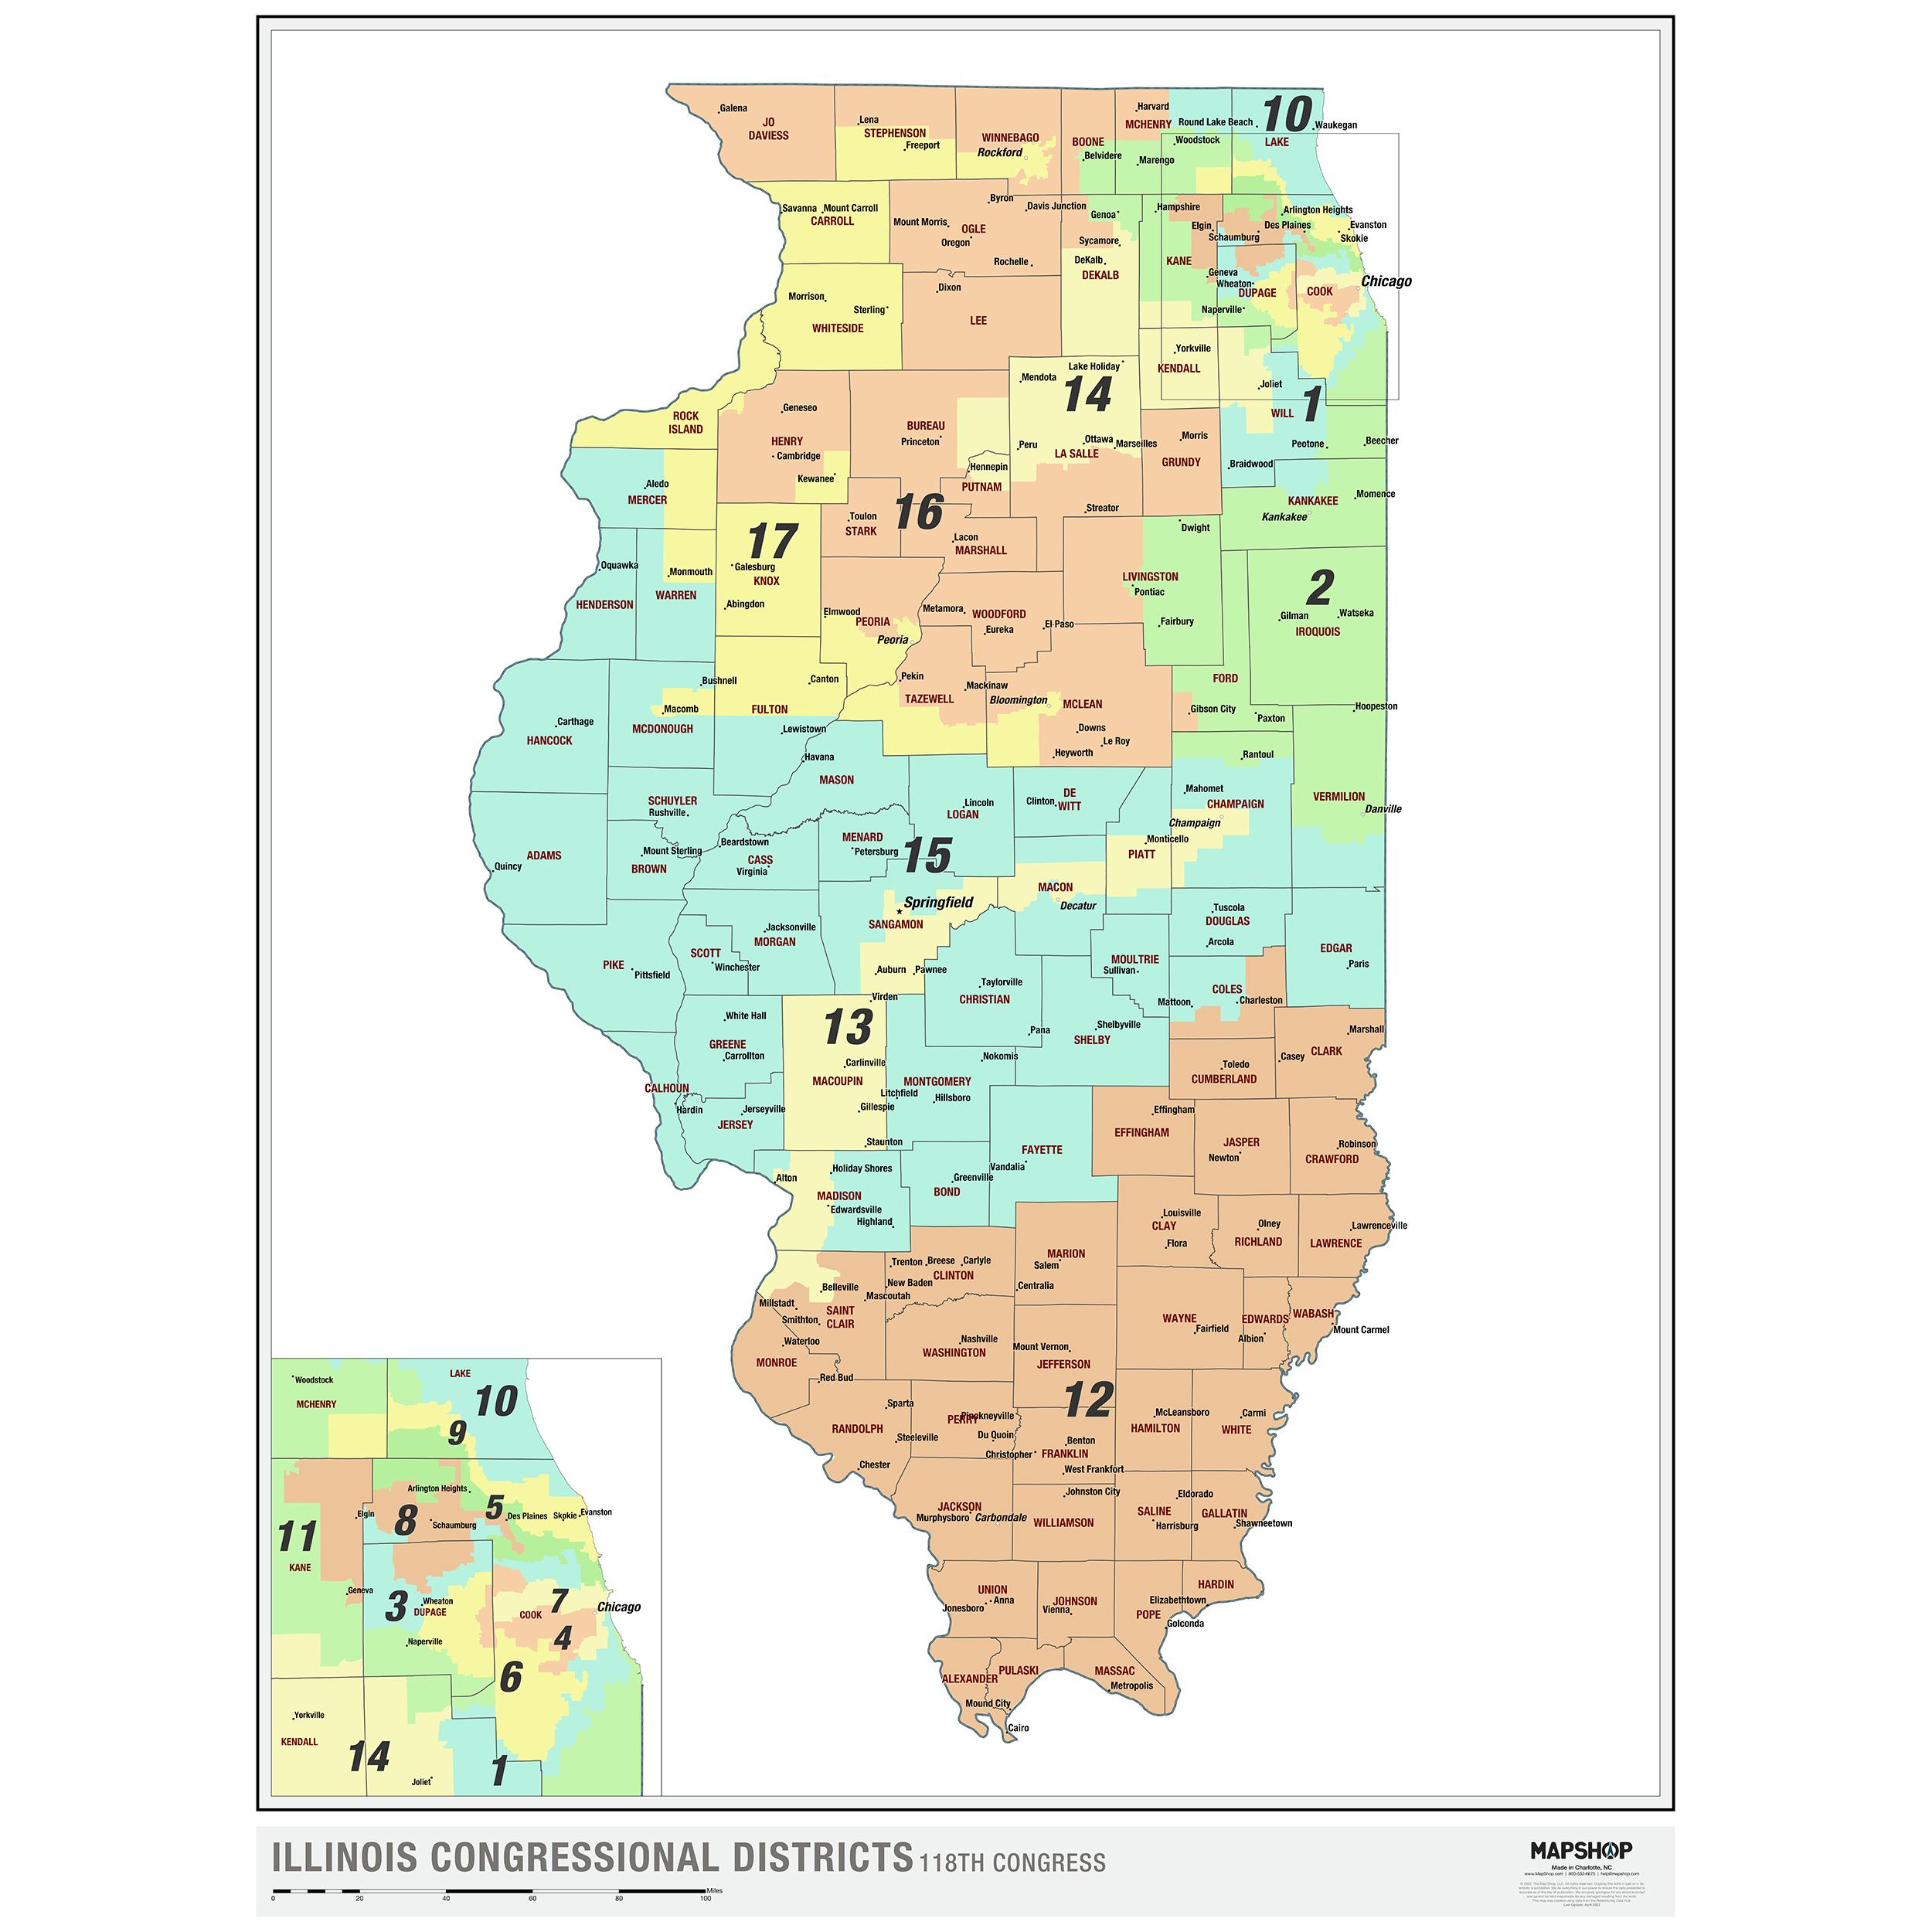 Illinois House District Map - Prudy Carlynne